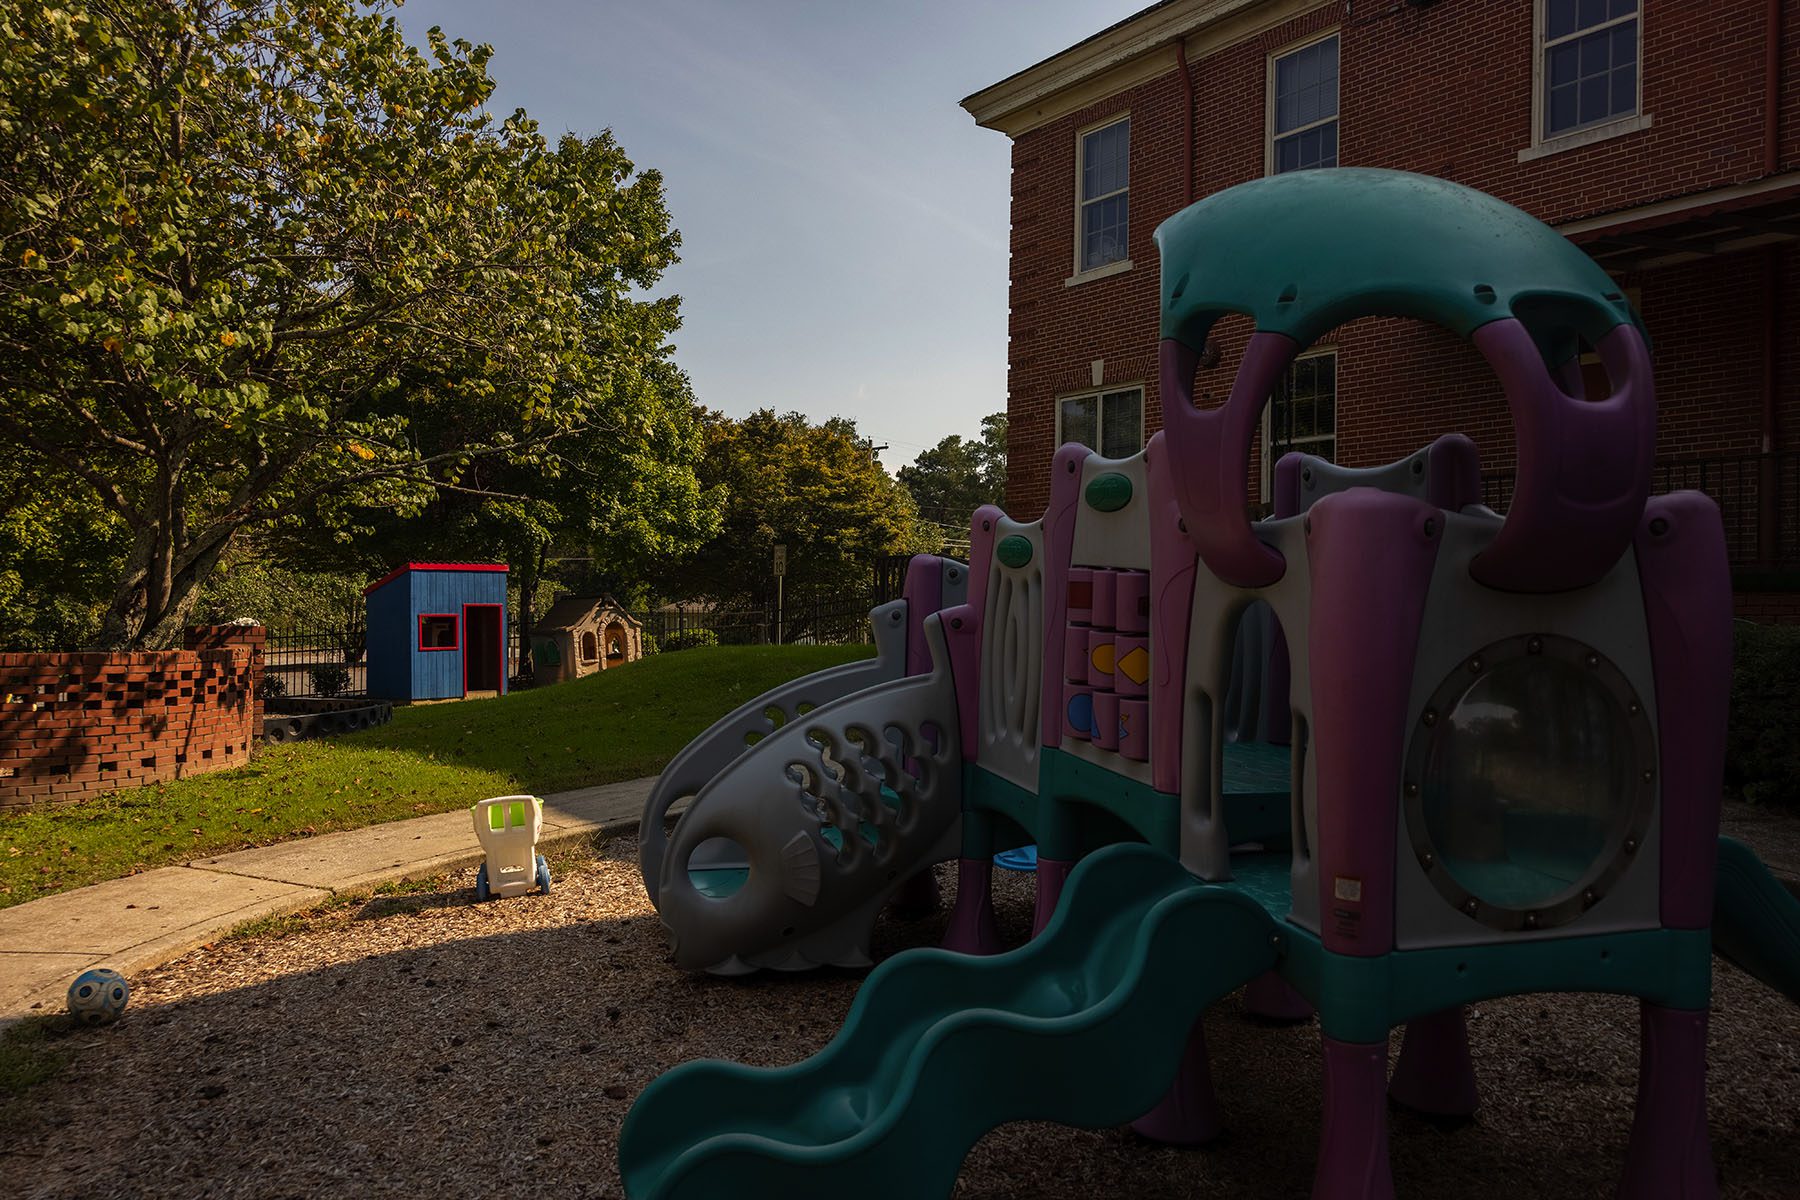 A playground jungle gym at the Chambliss Center for Children.